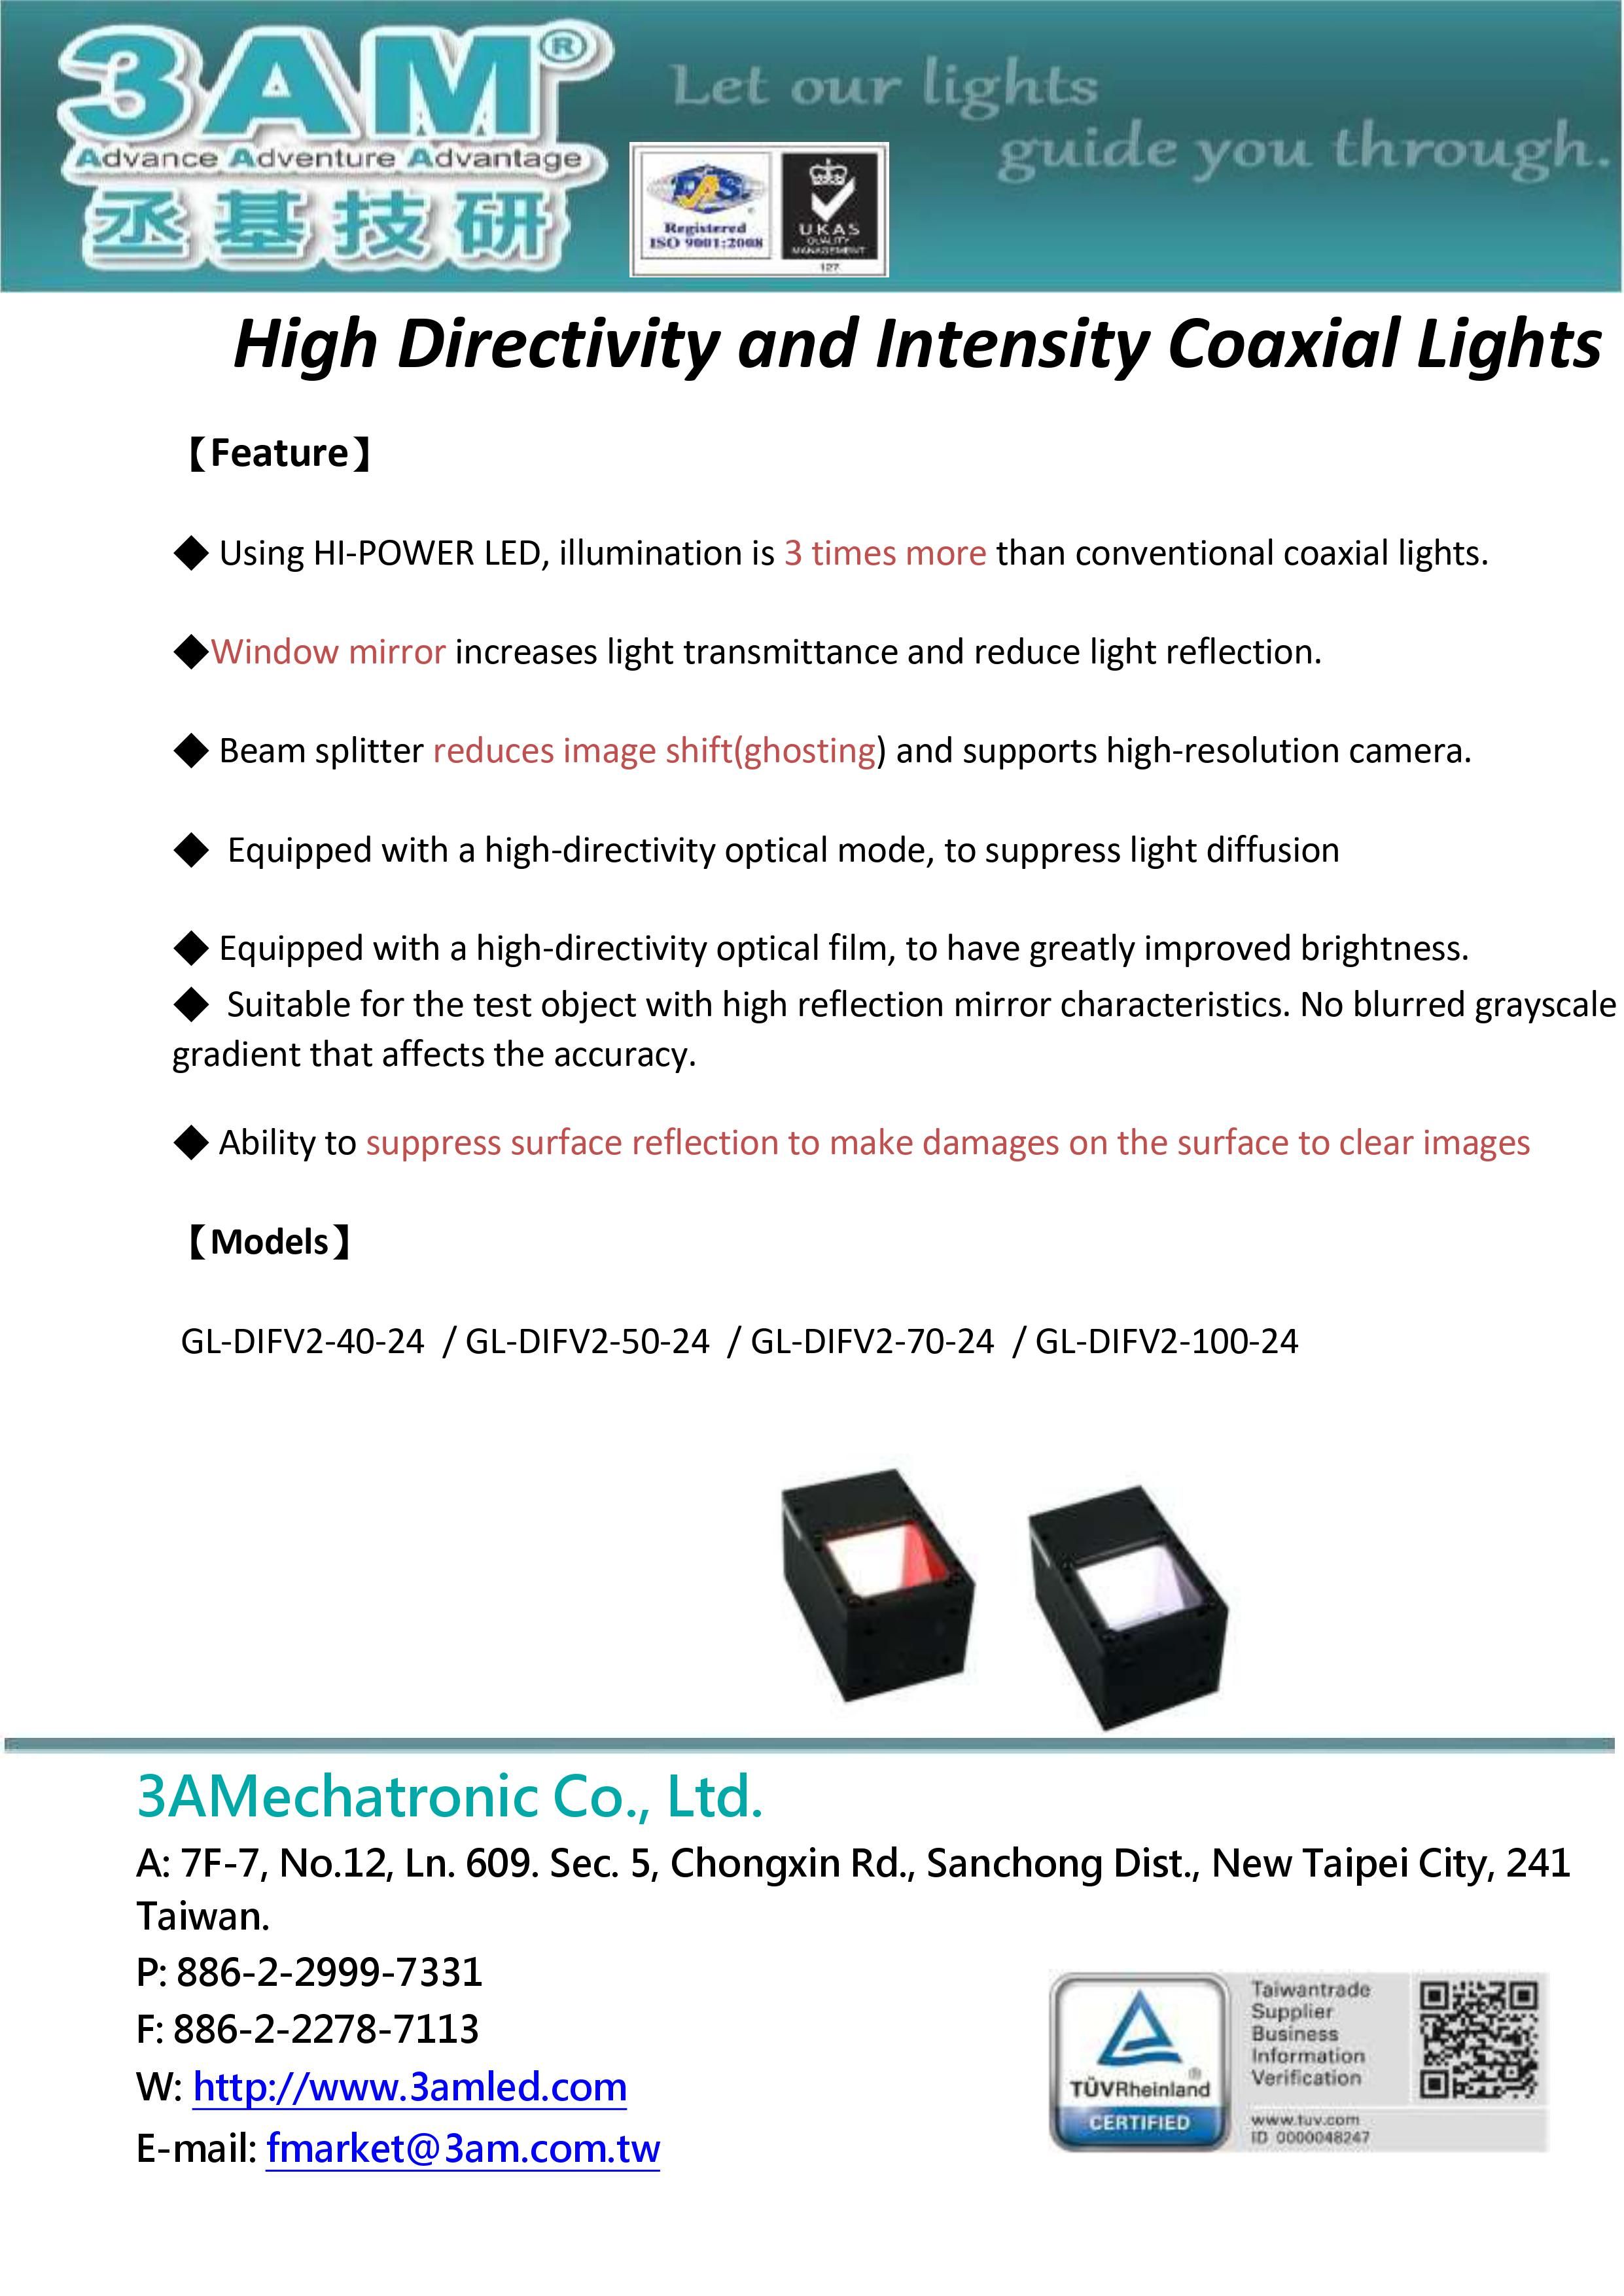 proimages/New_product_news/High_Directivity_and_Intensity_Coaxial_Lights-3AM_Product_News.jpg